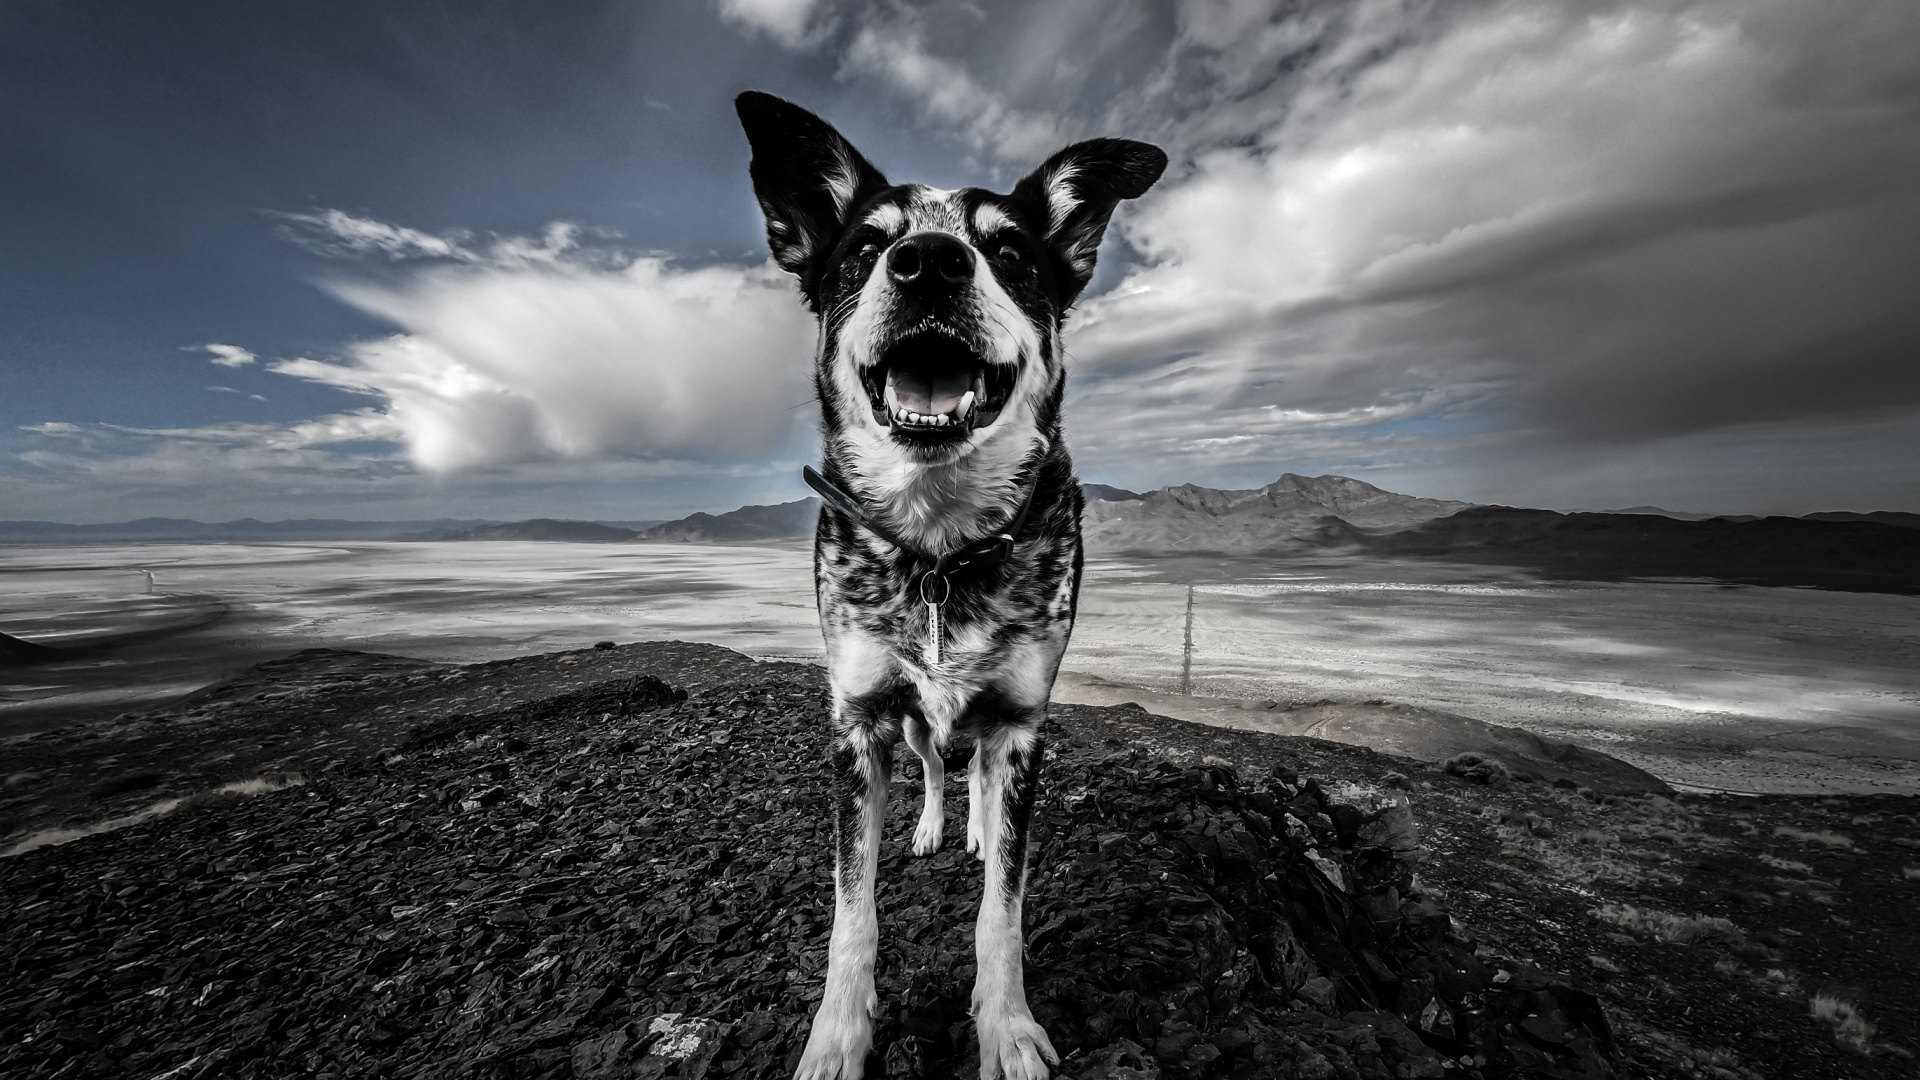 Black and White Dog on Brown Sand Under Blue Sky. Wallpaper in 1920x1080 Resolution